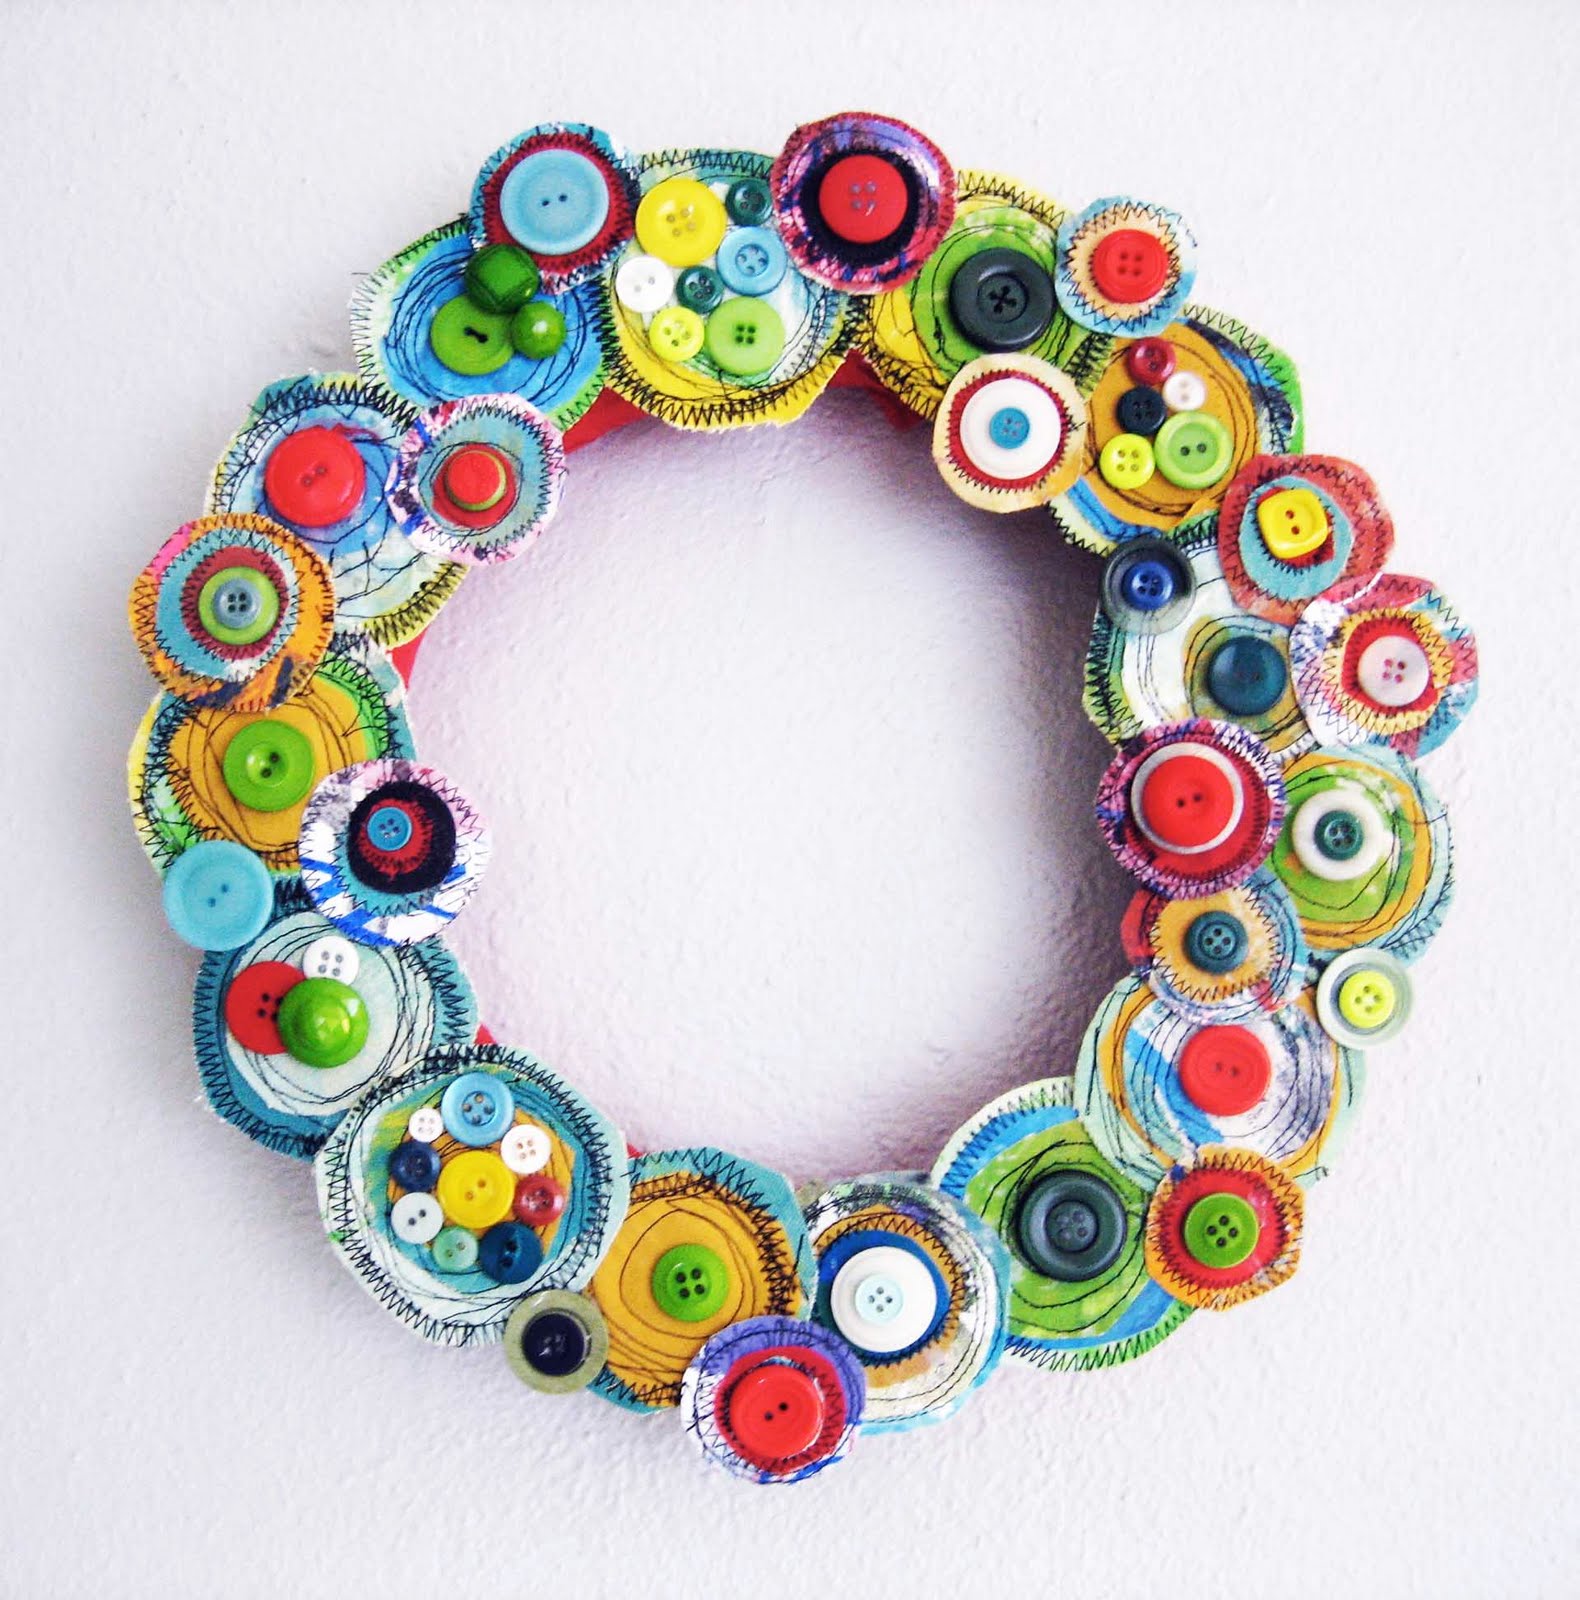 decoration-ideas-other-design-beautiful-colourful-ornate-buttons-with-creative-colourful-combined-patchwork-also-great-idea-for-christmas-wreath-decoration-ideas-inspiring-ideas-for